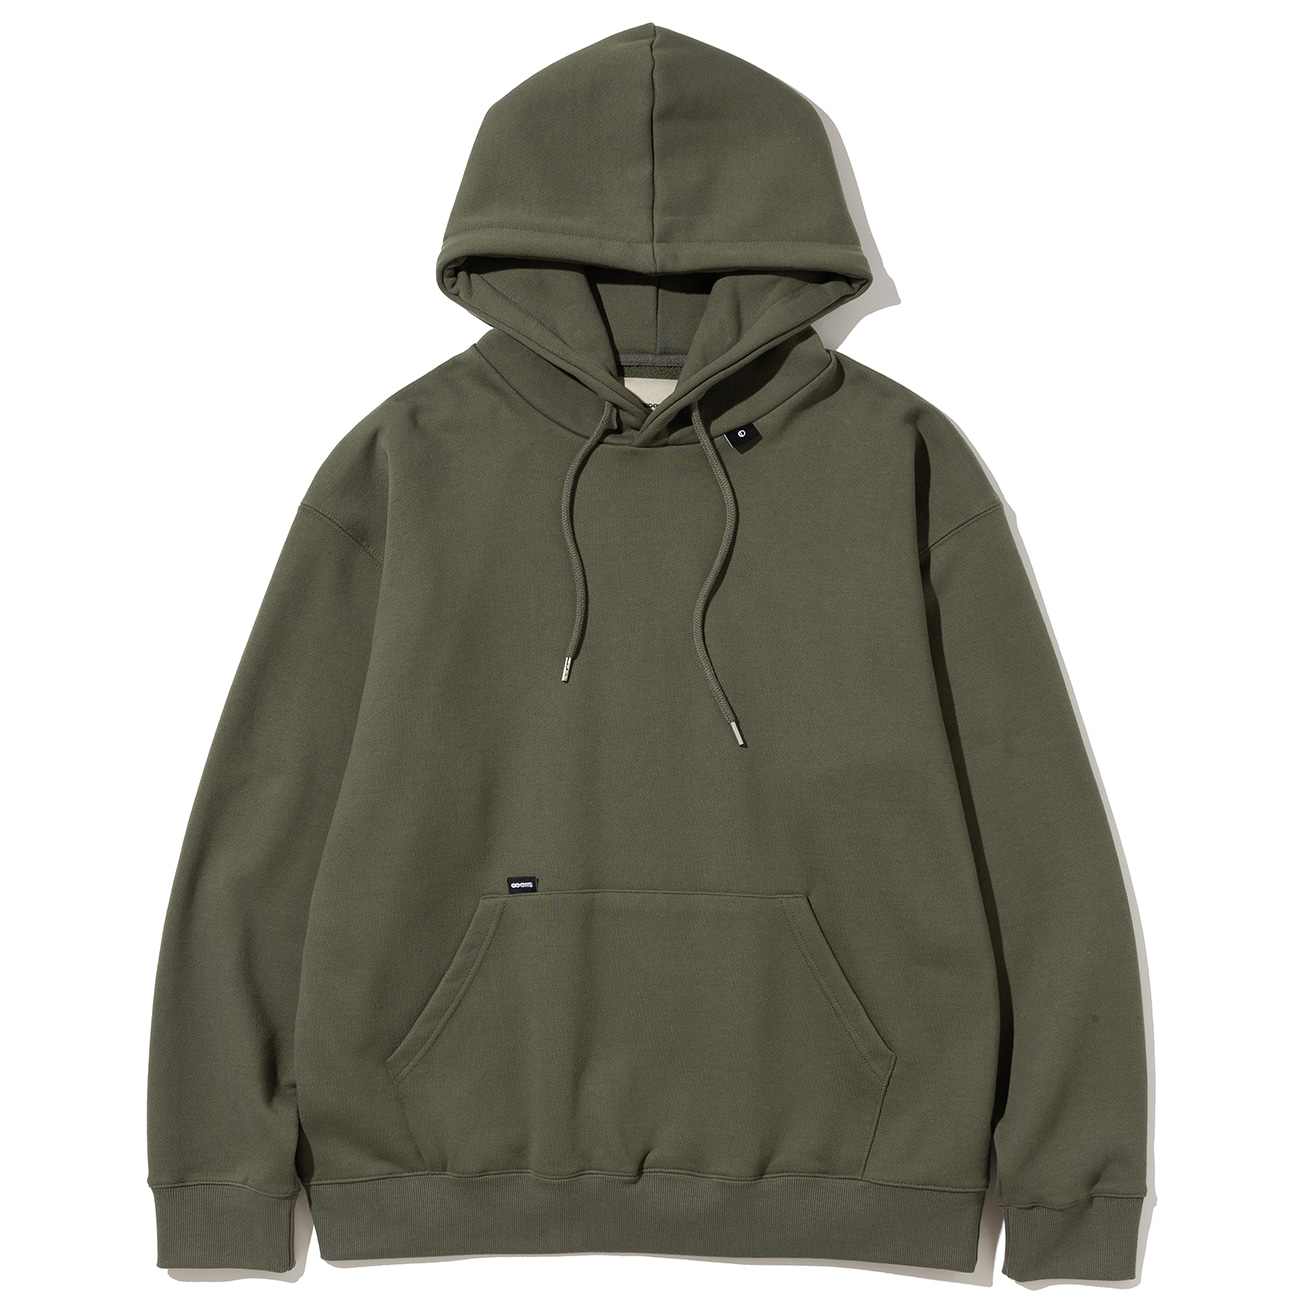 MINI LABEL DT RELAXED HOODIE #1(1st restock)